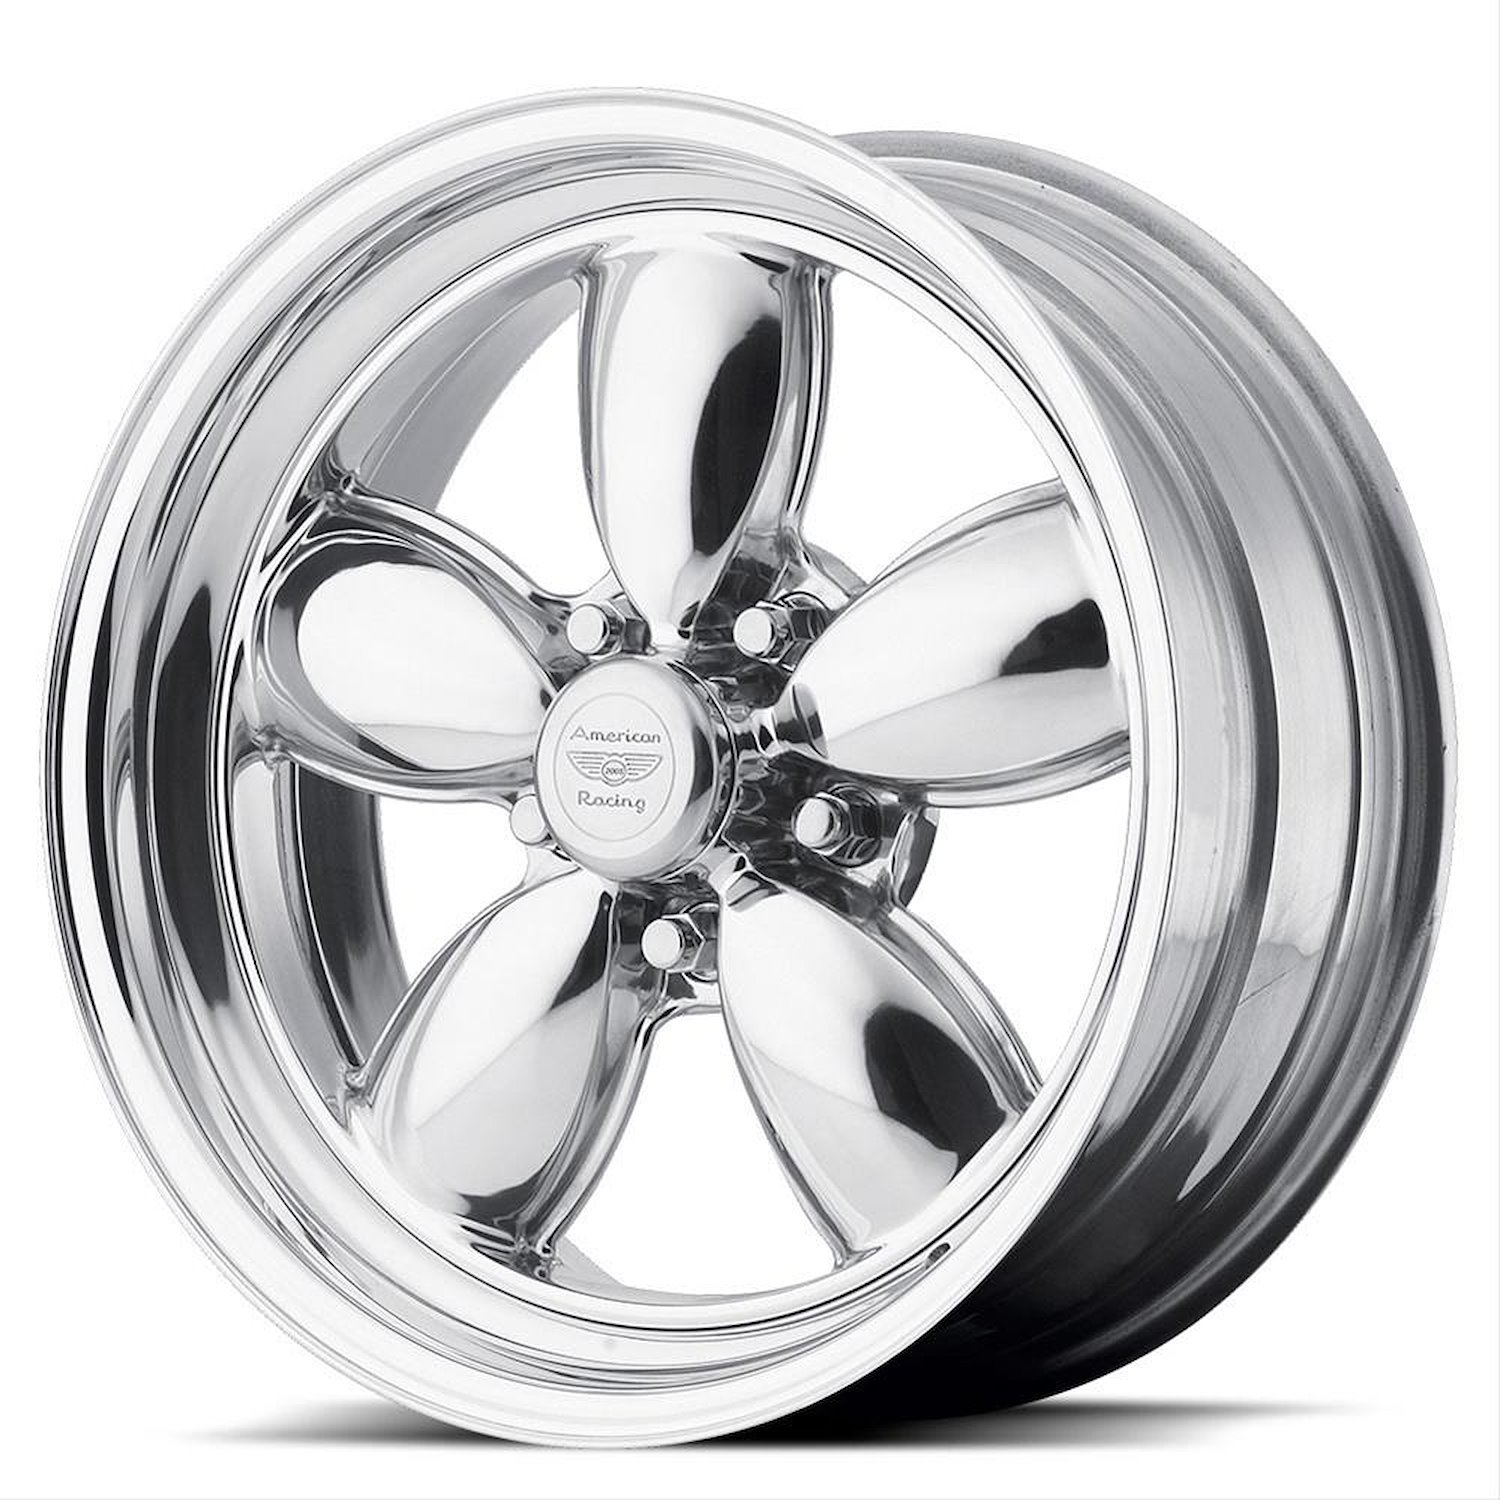 AMERICAN RACING CLASSIC 200S TWO-PIECE POLISHED 15 x 7 5X4.75 -6 3.76